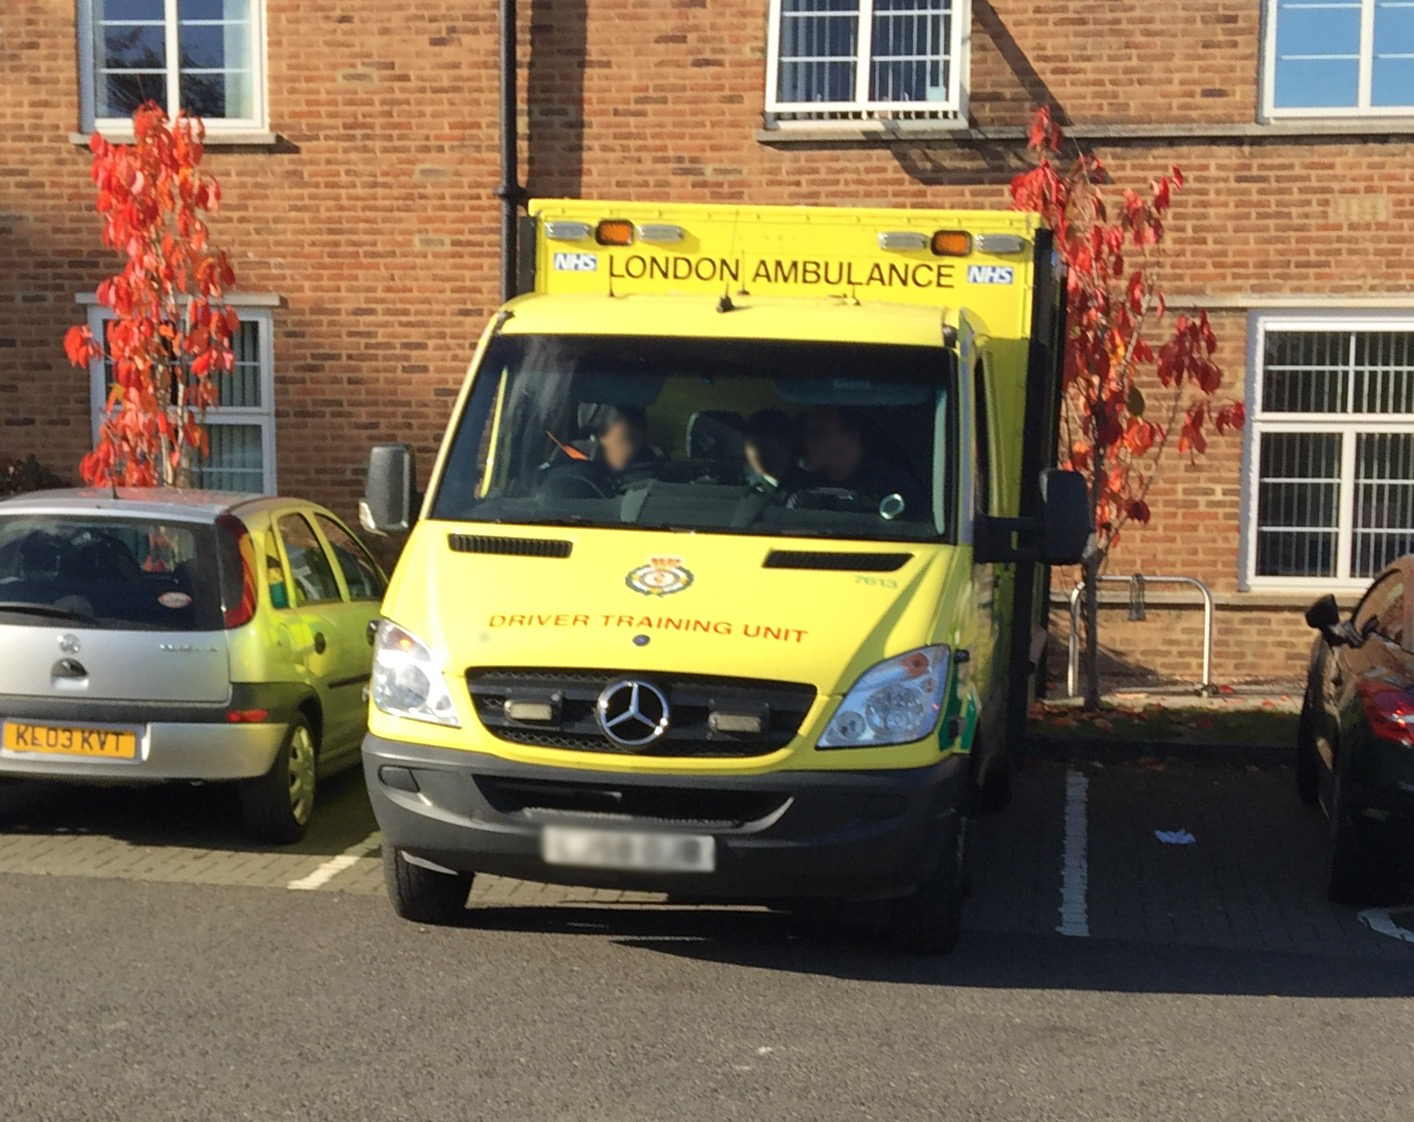 The East of England Ambulance Service Trust are always working to improve